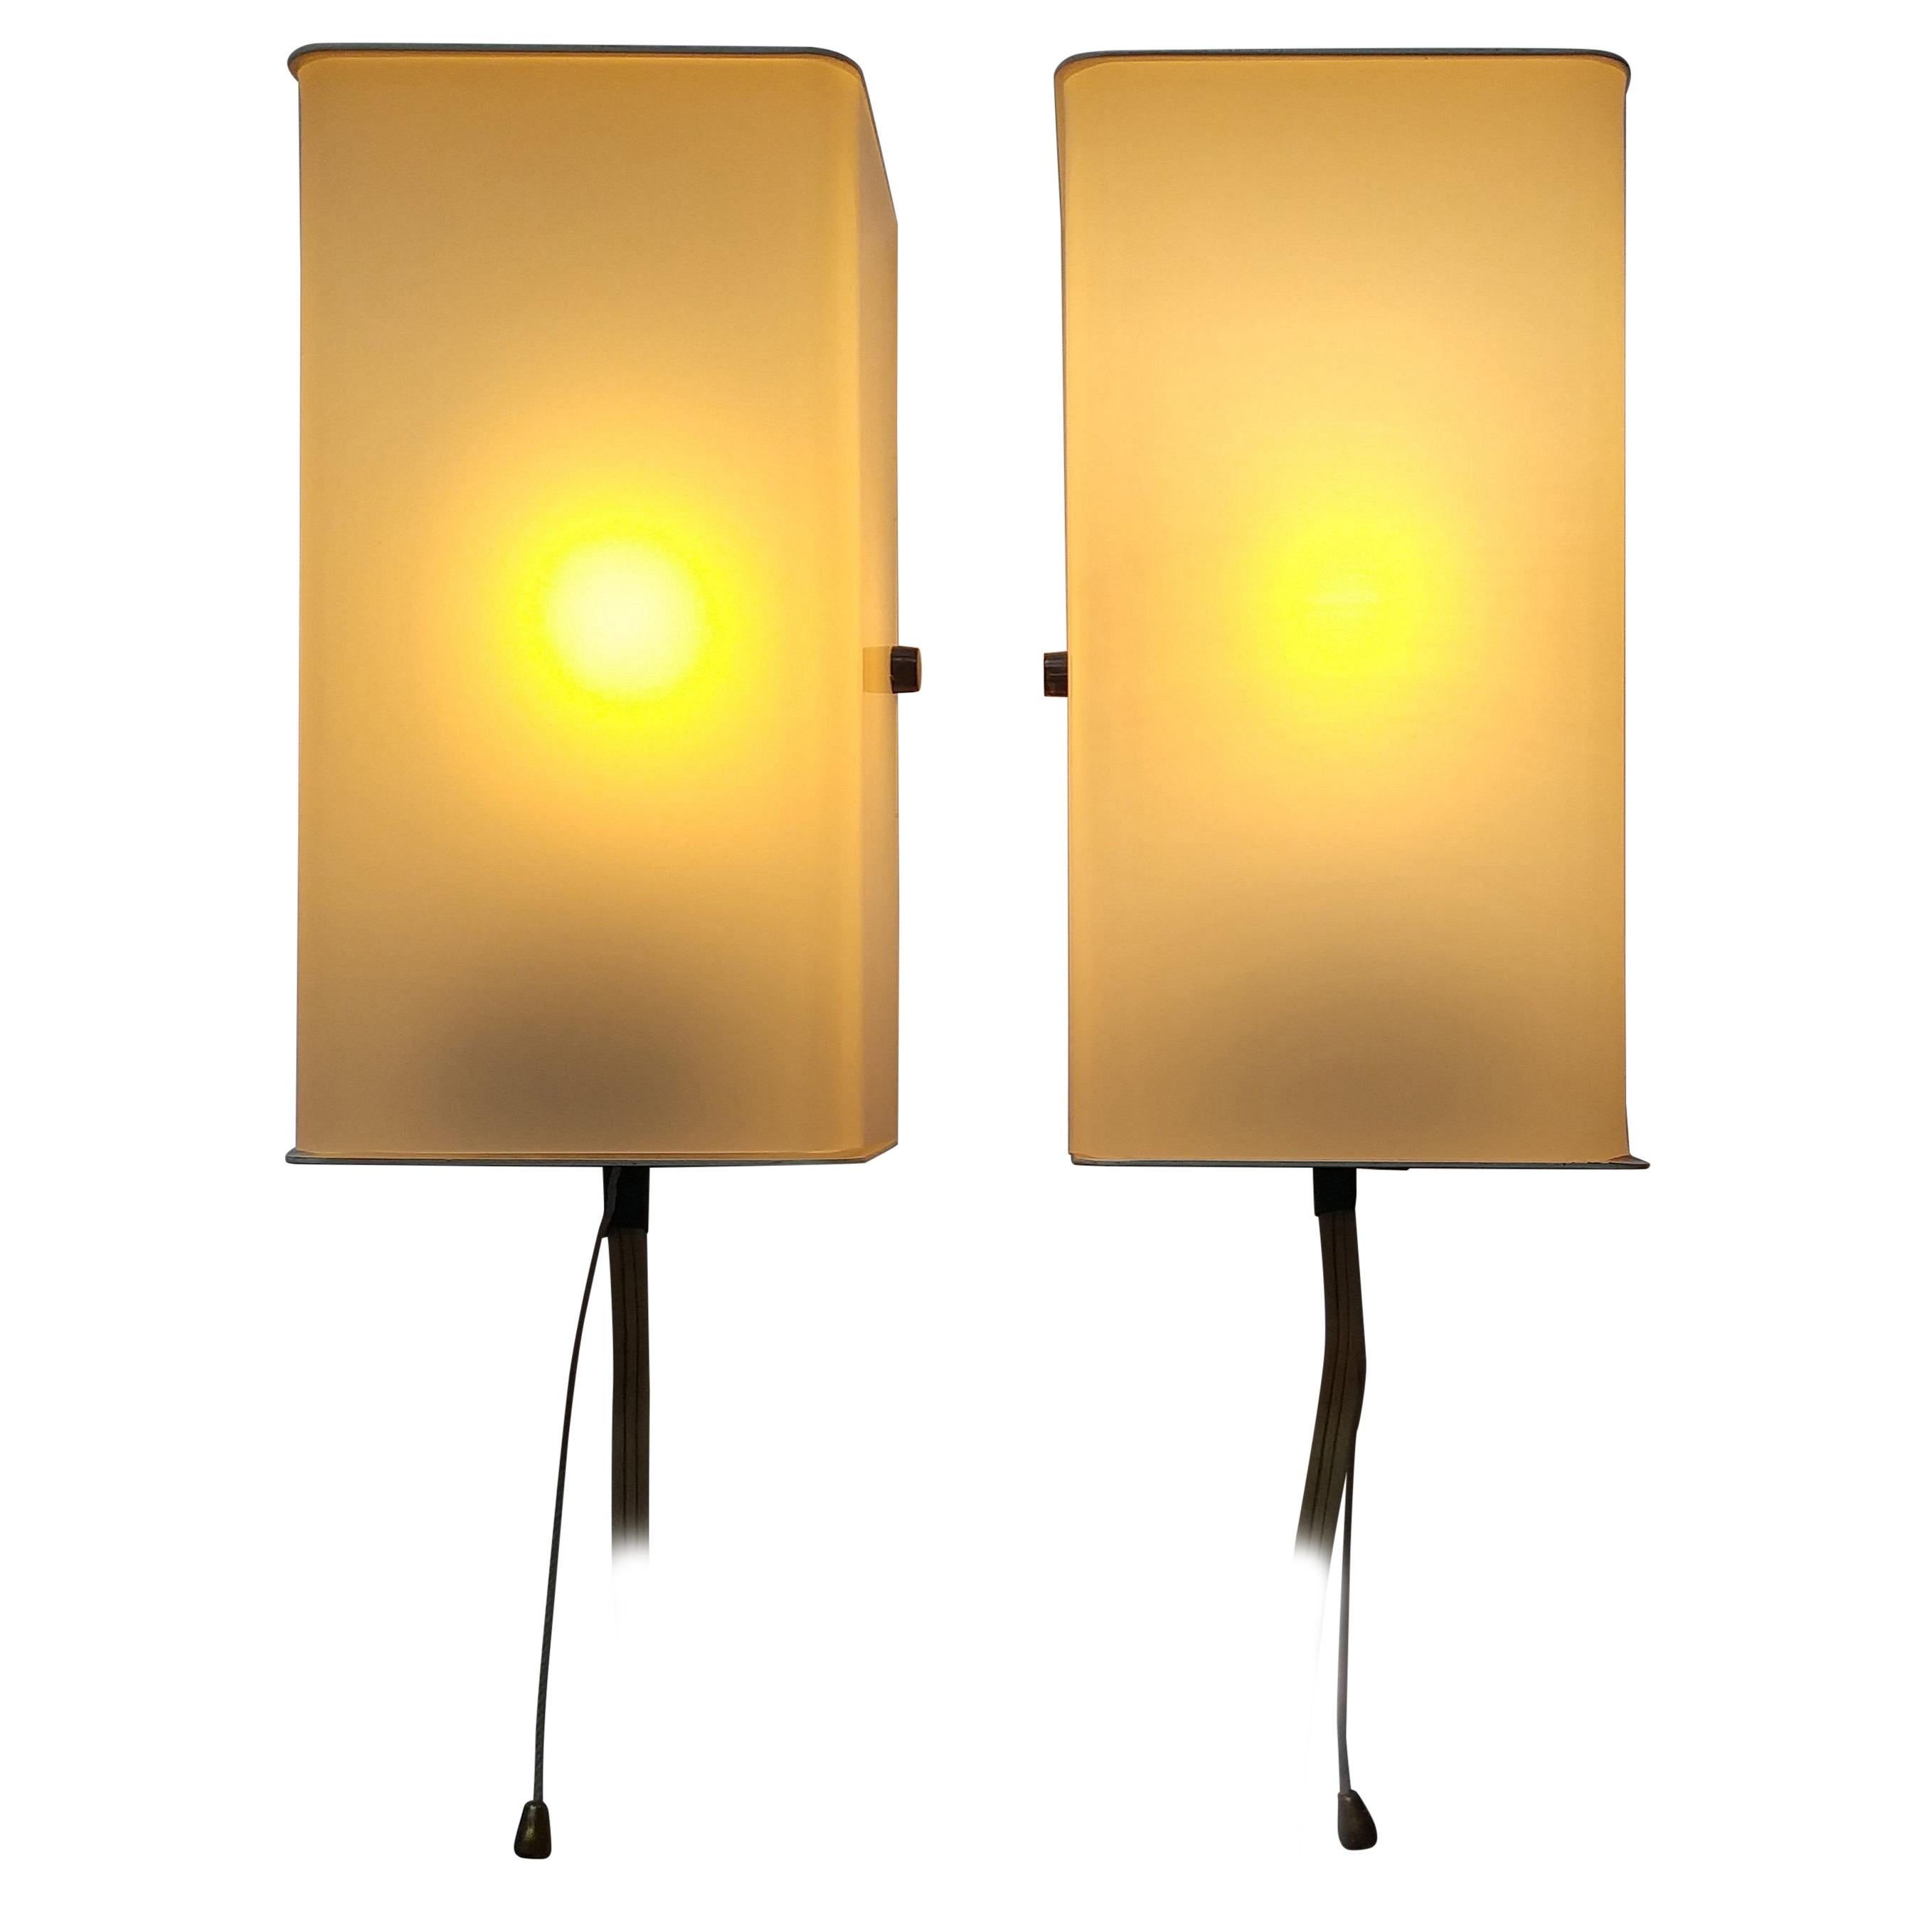 Pair of Midcentury Wall or Table Lamps, Pokrok, 1970s